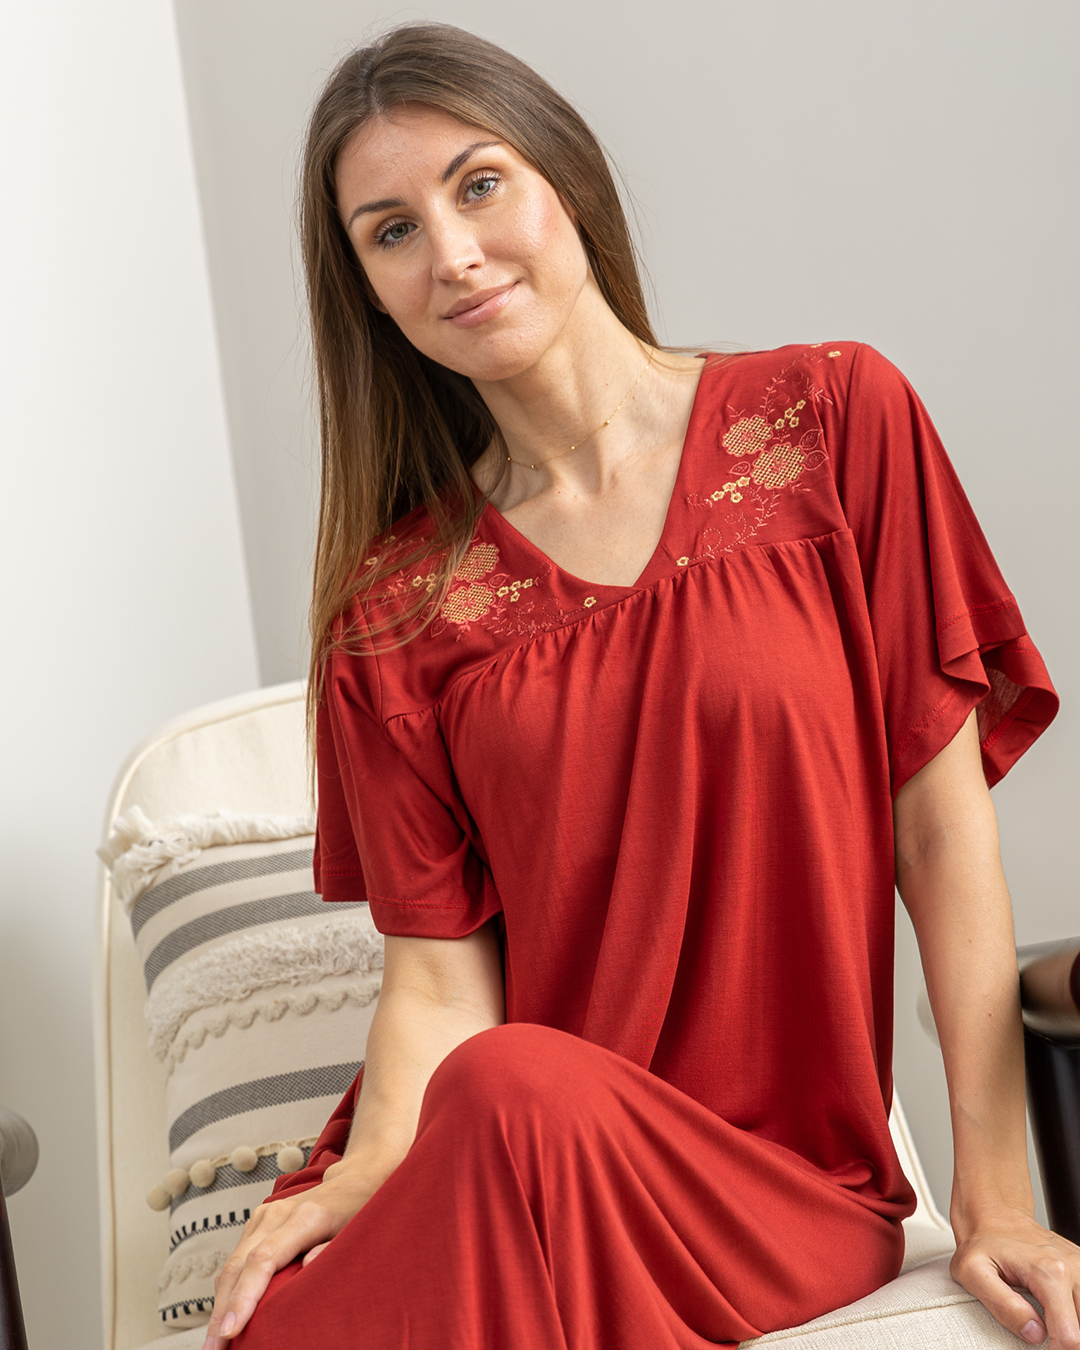 Women's shirt, half-sleeved, embroidered, the Quill rose